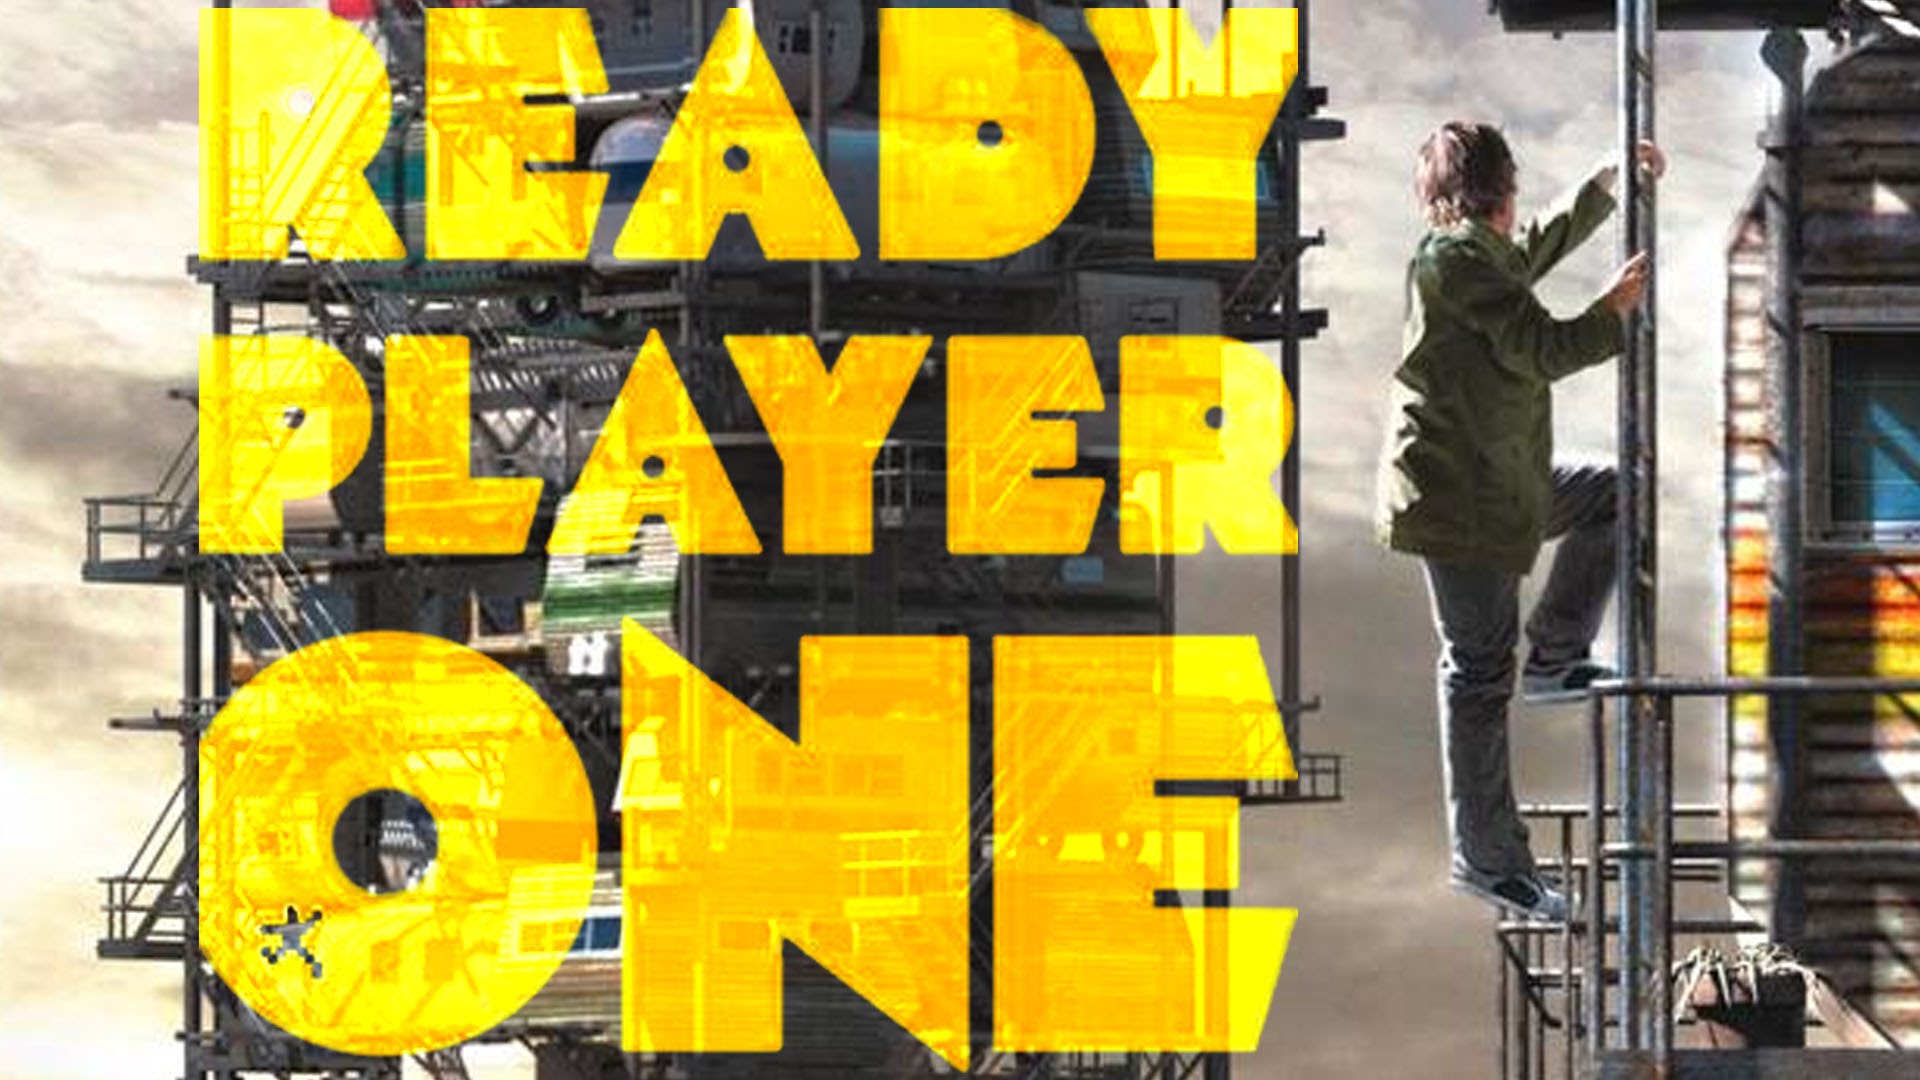 Everything We Know About Steven Spielberg's 'Ready Player One' Movie